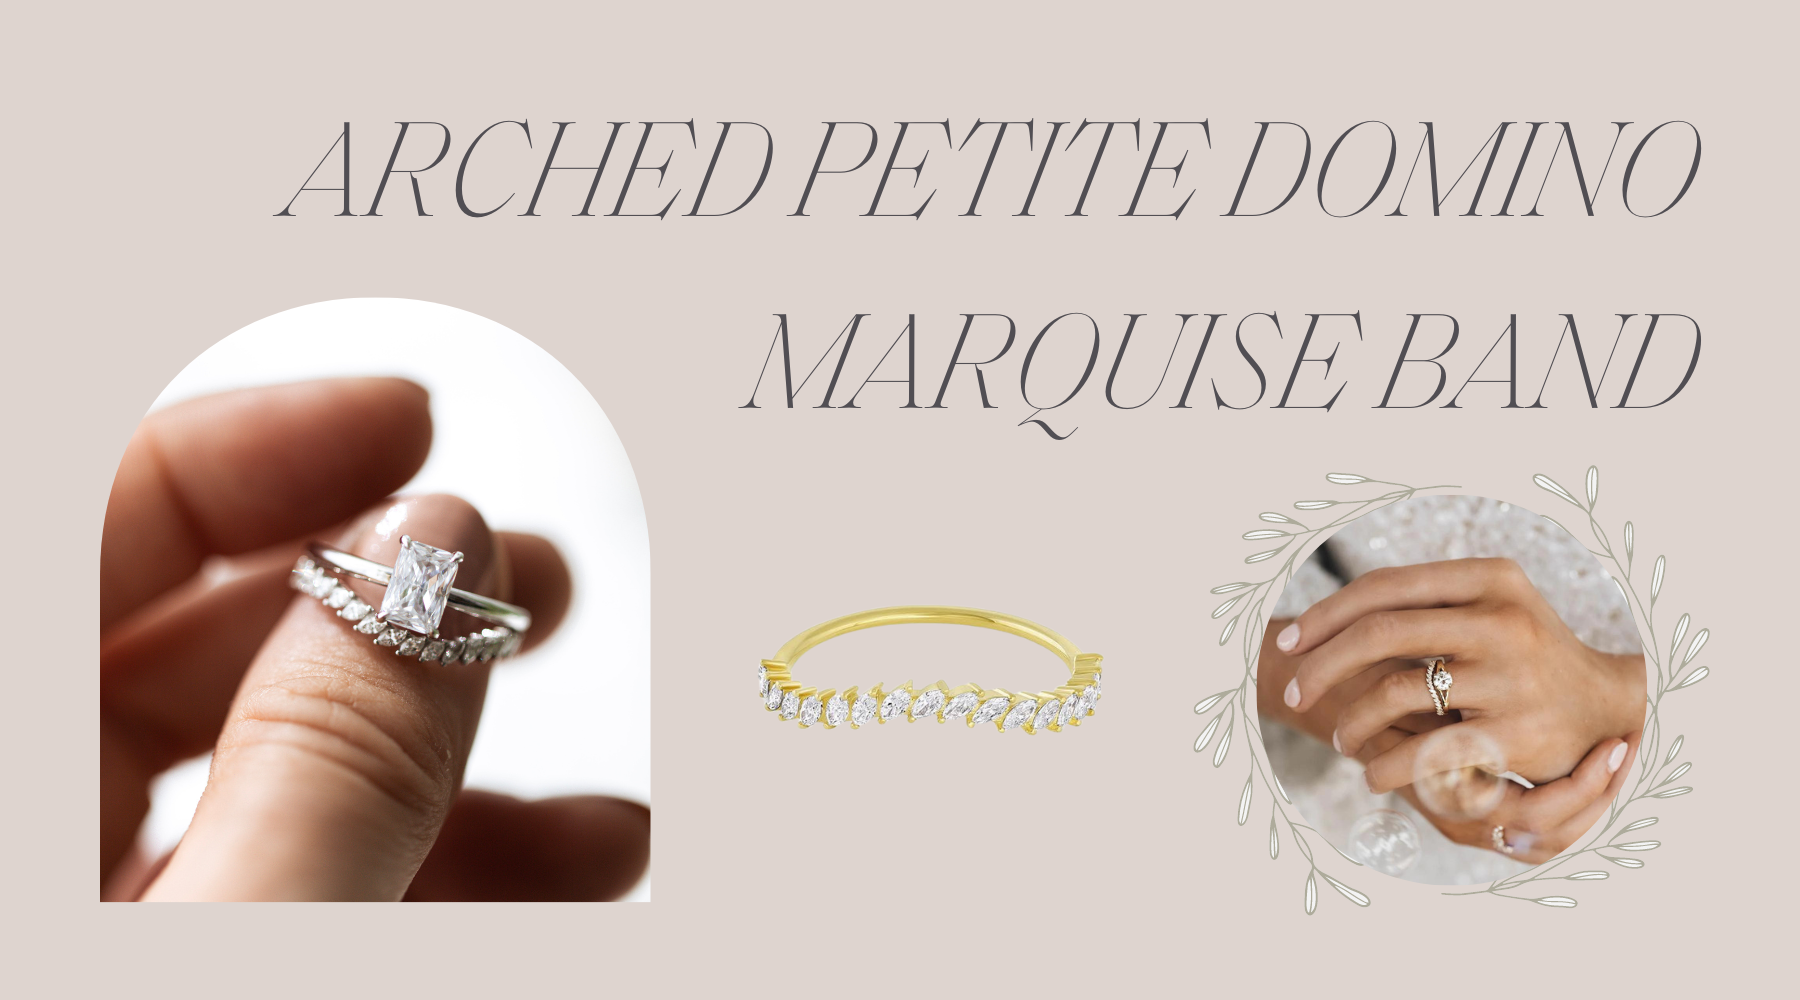 arched petite domino marquise band